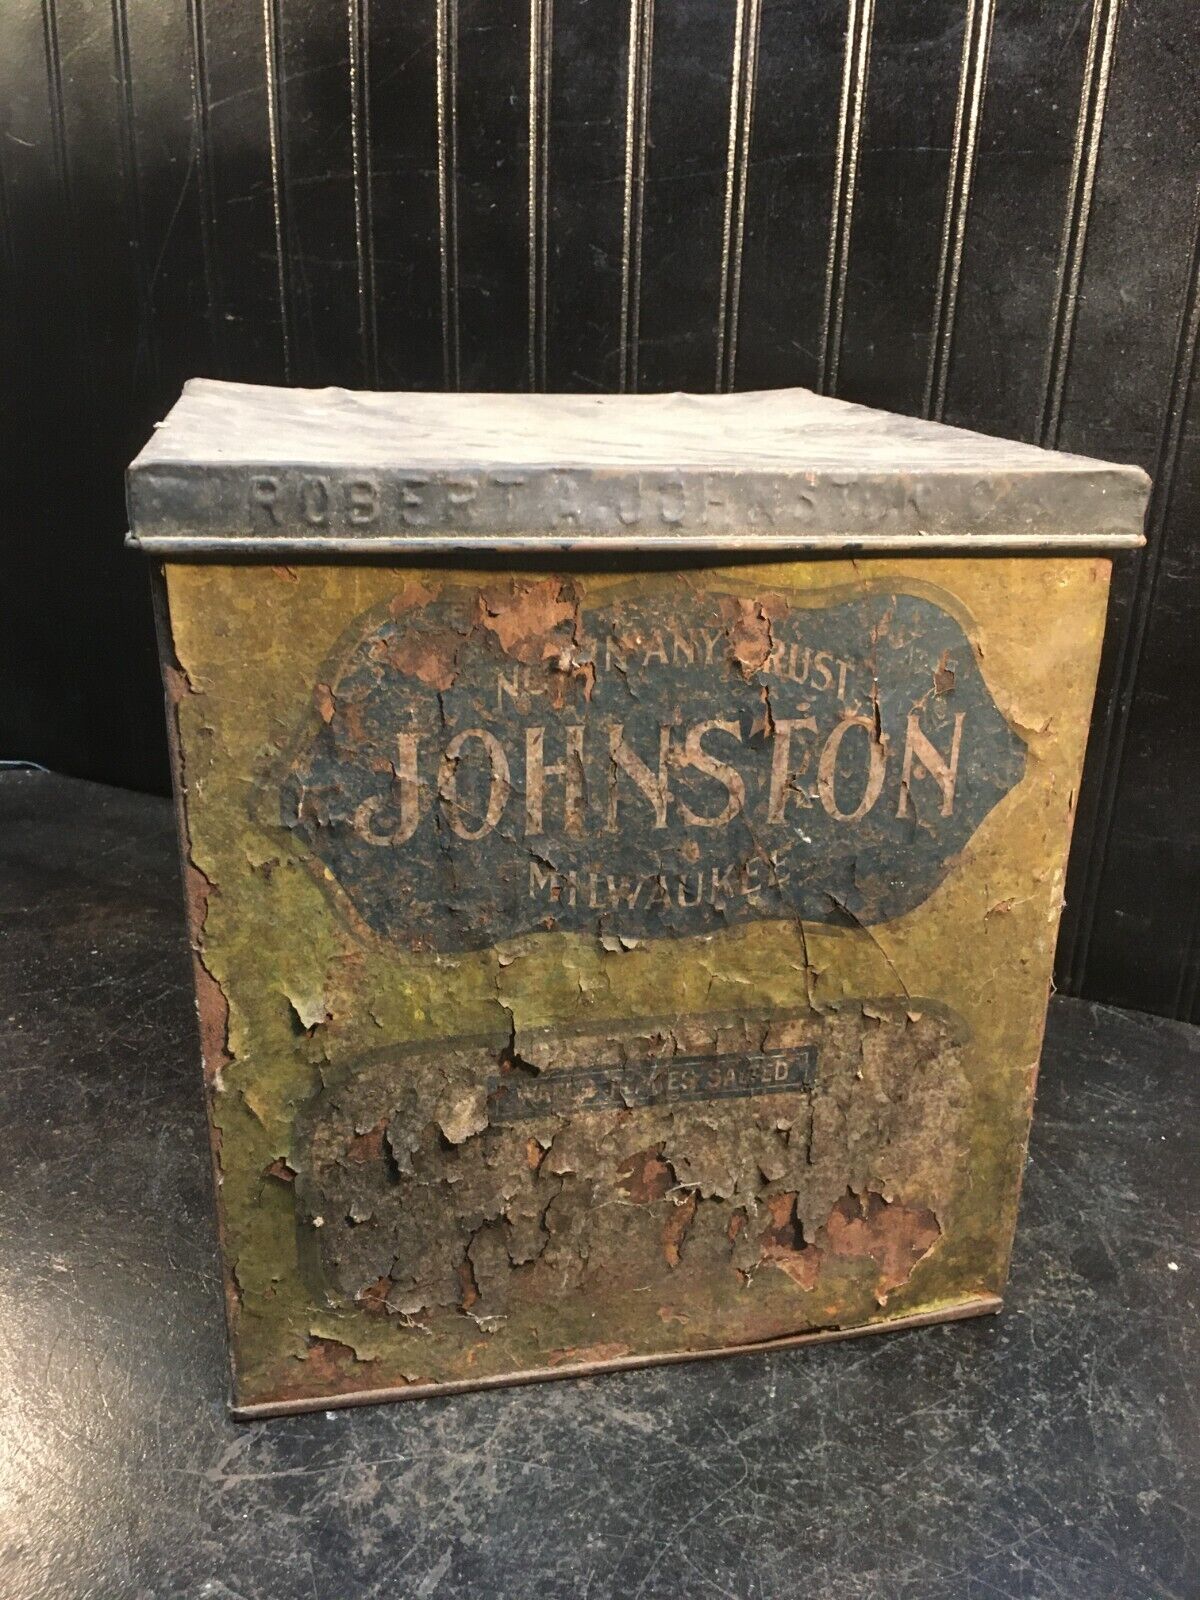 VTG Biscuits Tin ROBERT A JOHNSTON CO Biscuits Milwaukee WISC. Corn Flake Box